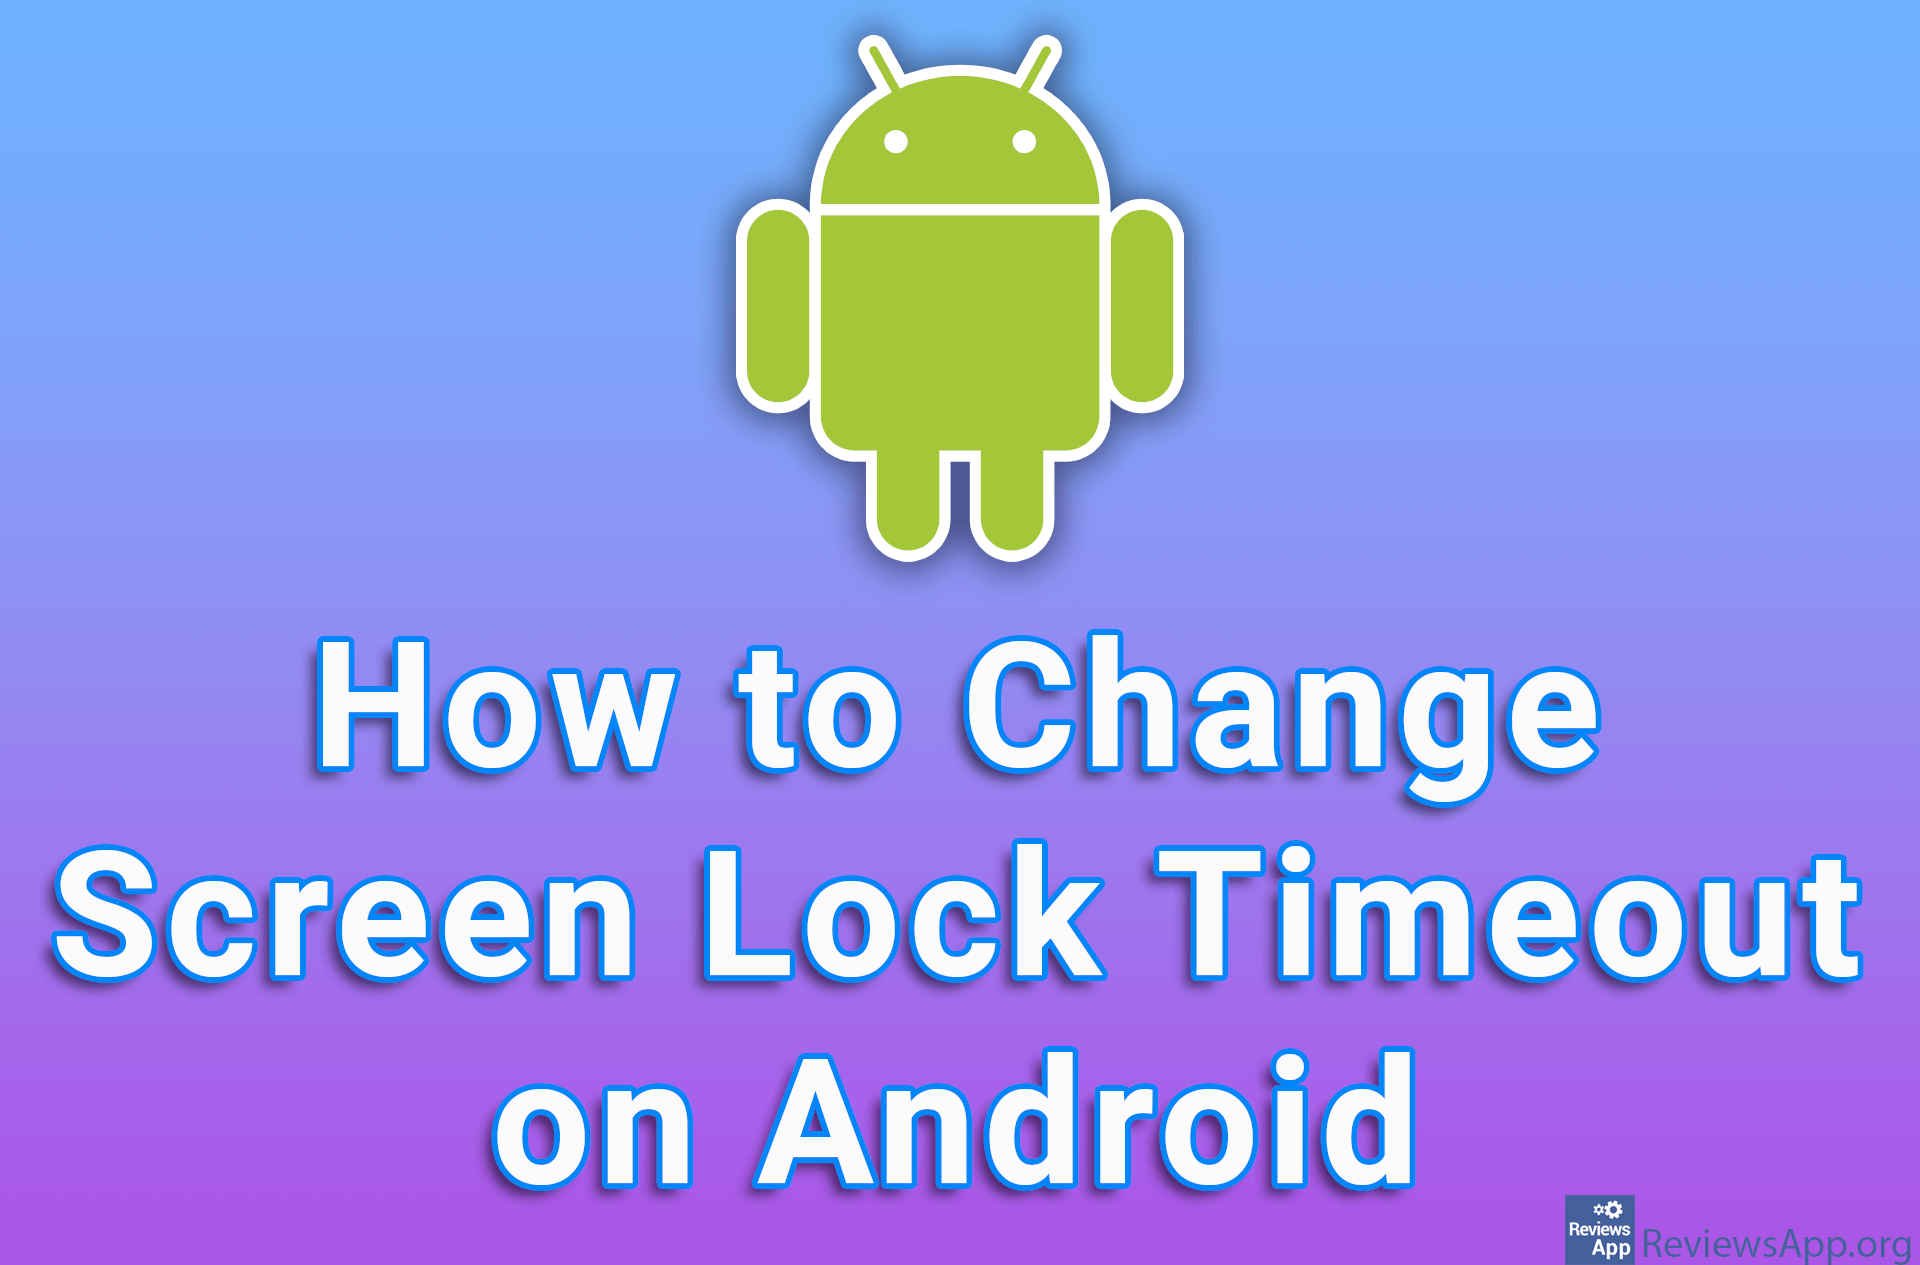 How to Change Screen Lock Timeout on Android